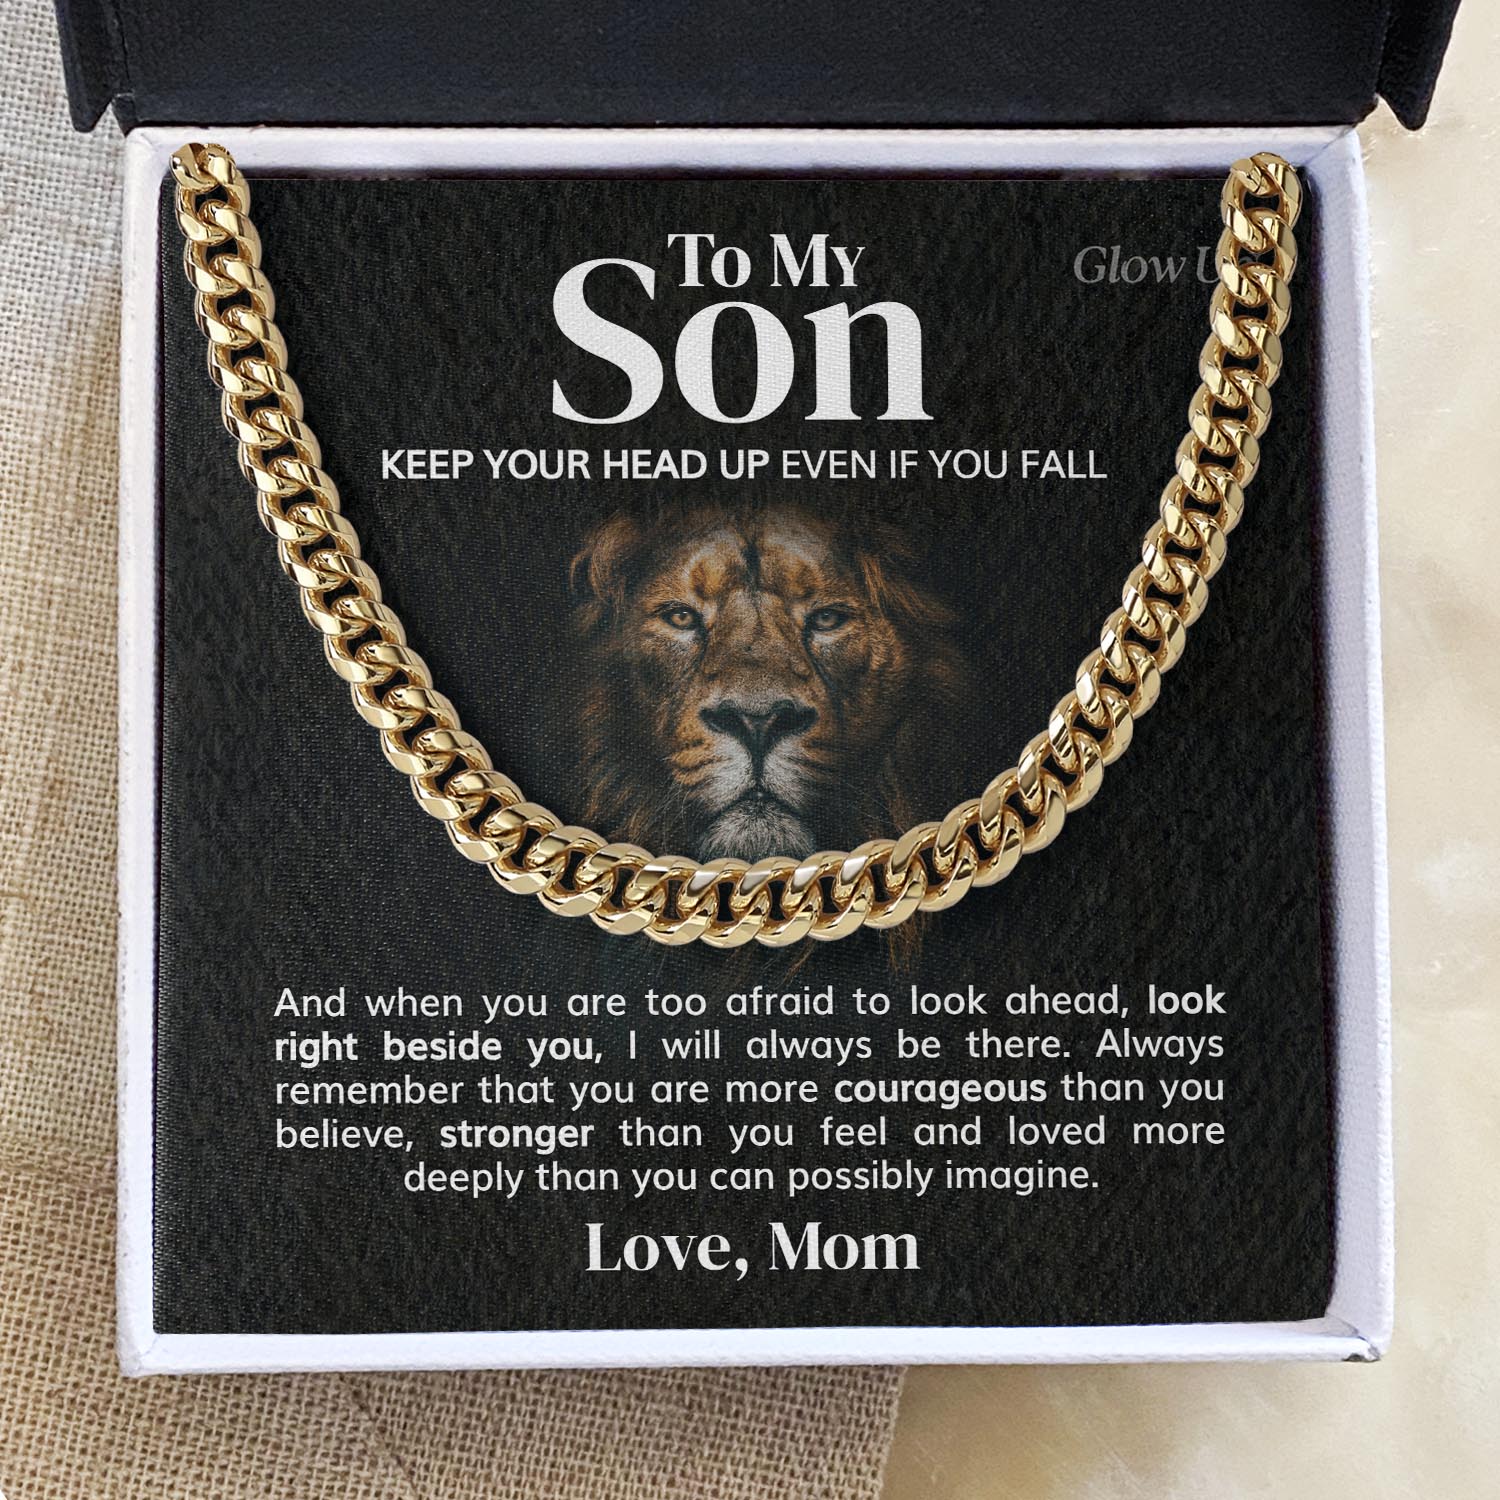 GlowUp 18k Gold Finish / Two-Toned Box To my Son from Mom - Keep your head up - Cuban Link Chain